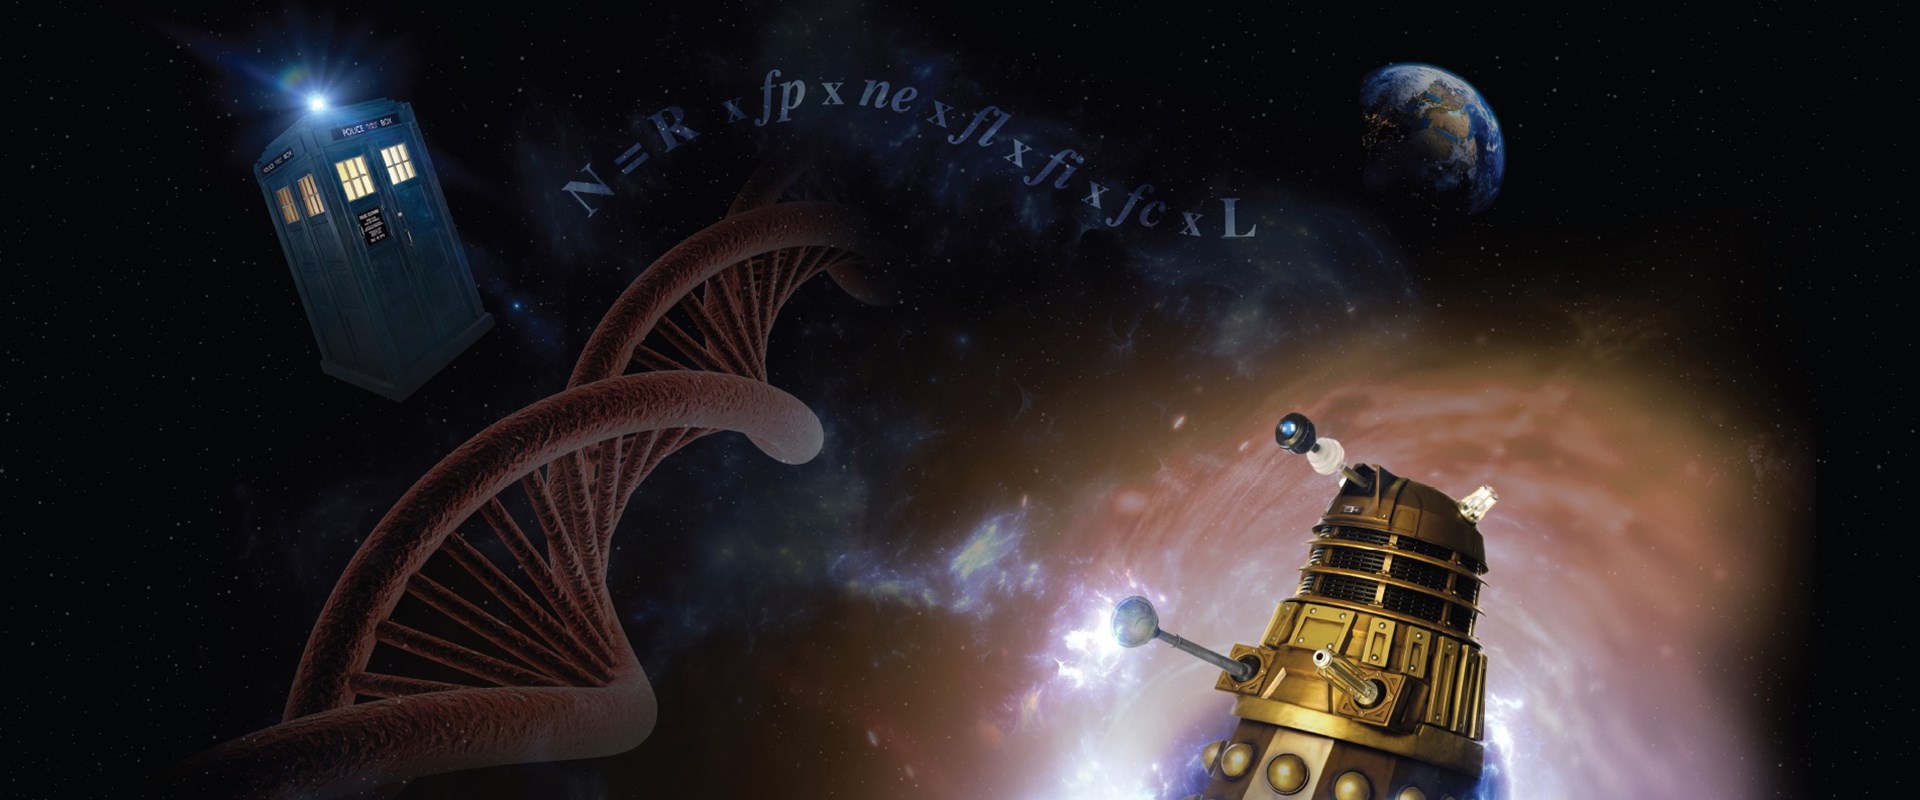 Dalek cyborg emerging from a vortex in space with a DNA double helix, police box, and earth in the background.